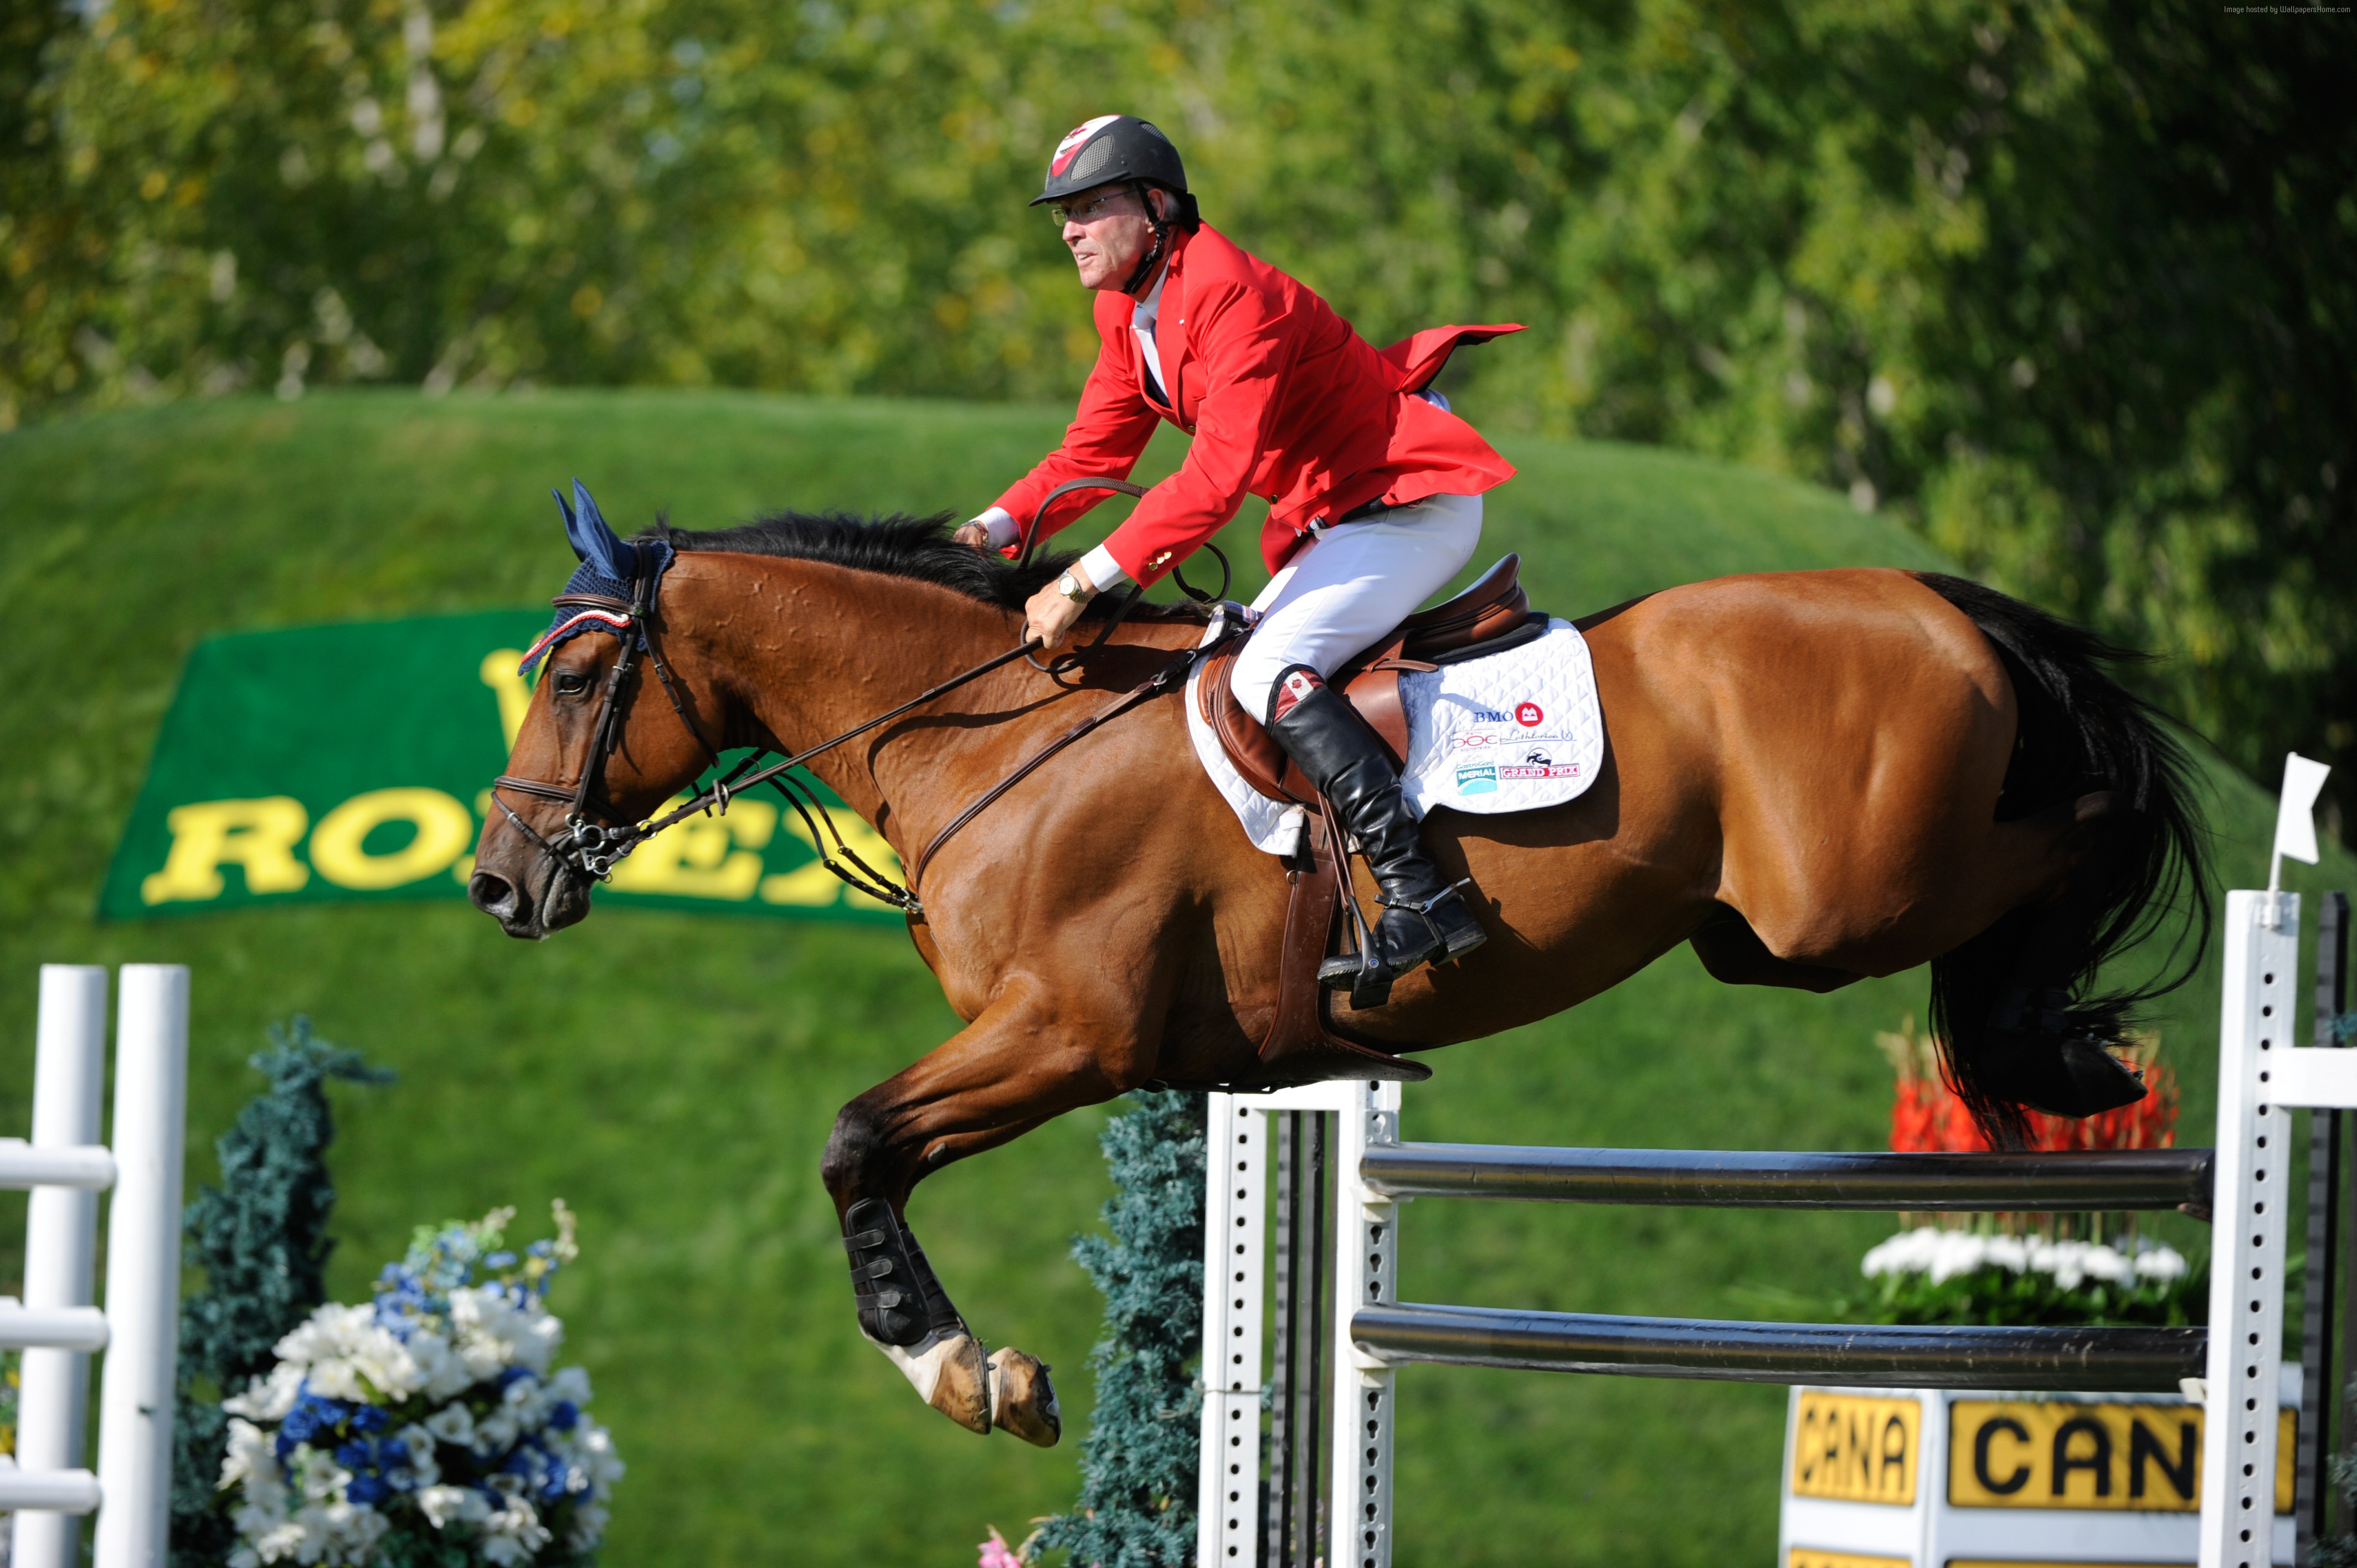 #man, #4k, #horse - Famous Olympic Horse Riders , HD Wallpaper & Backgrounds